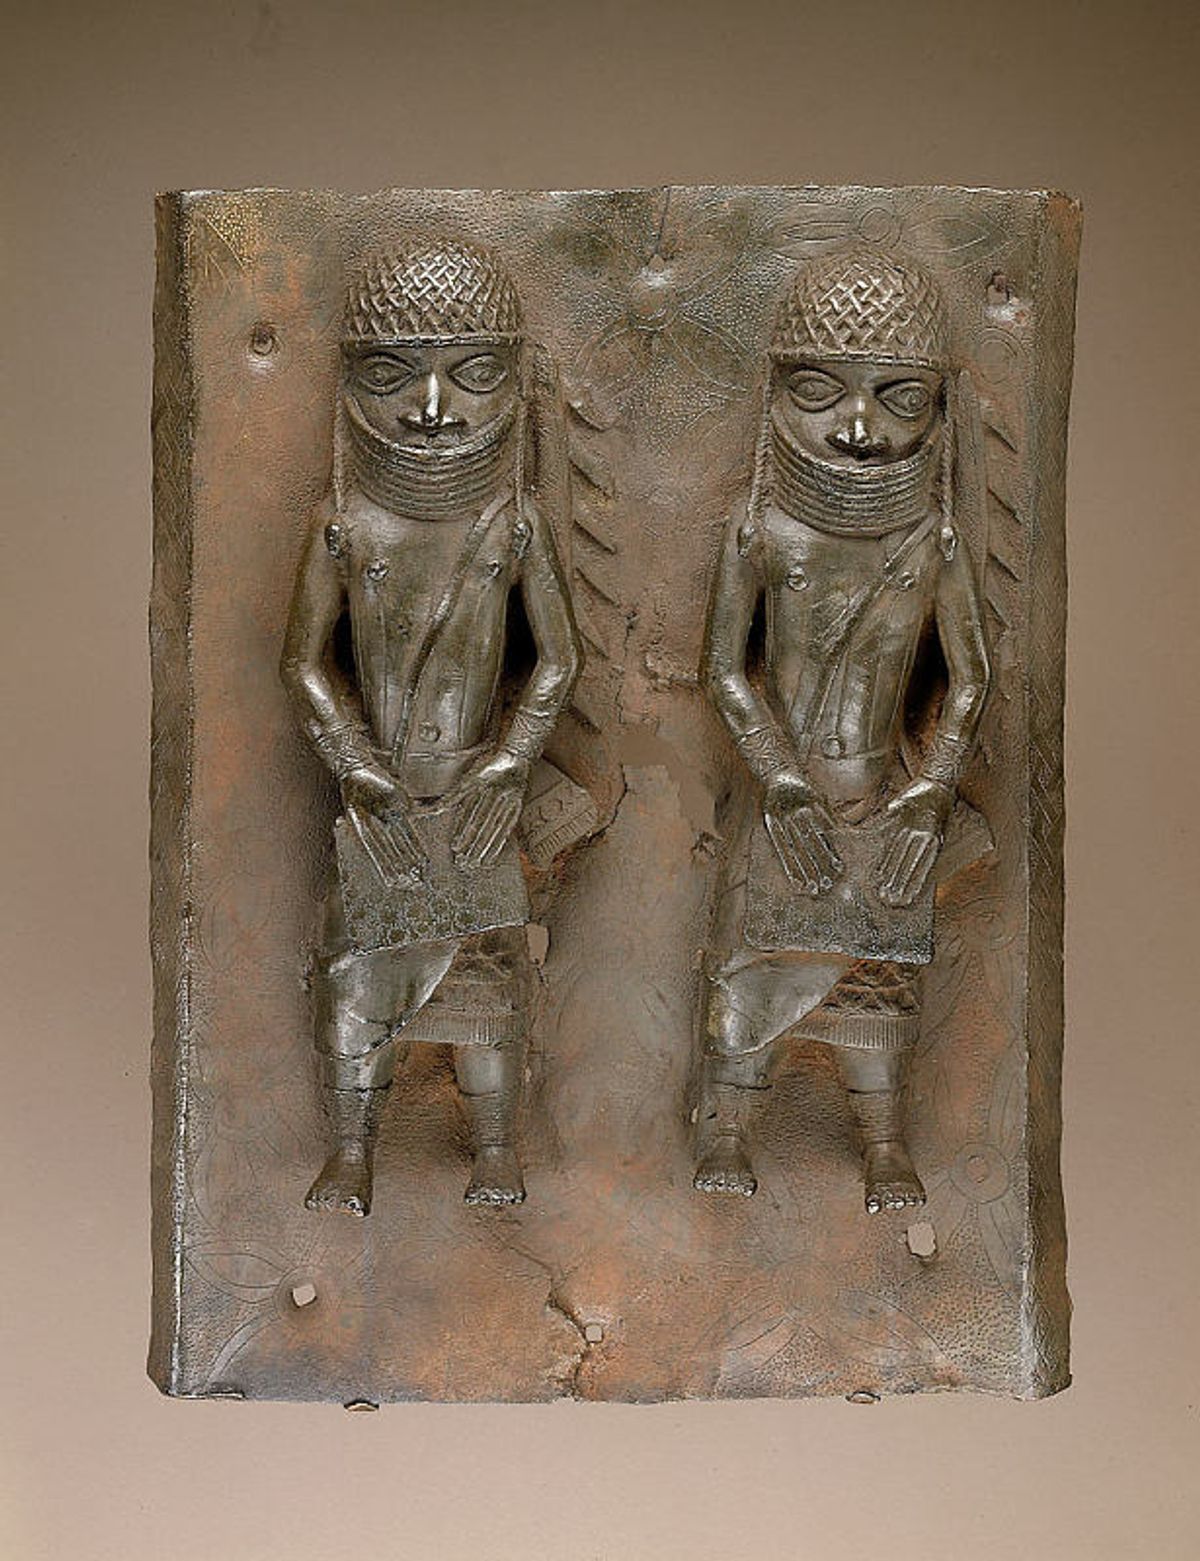 A Benin Kingdom plaque (mid-16th to 17th century) in the Smithsonian's collection thought to have been looted in the 1897 raid 


